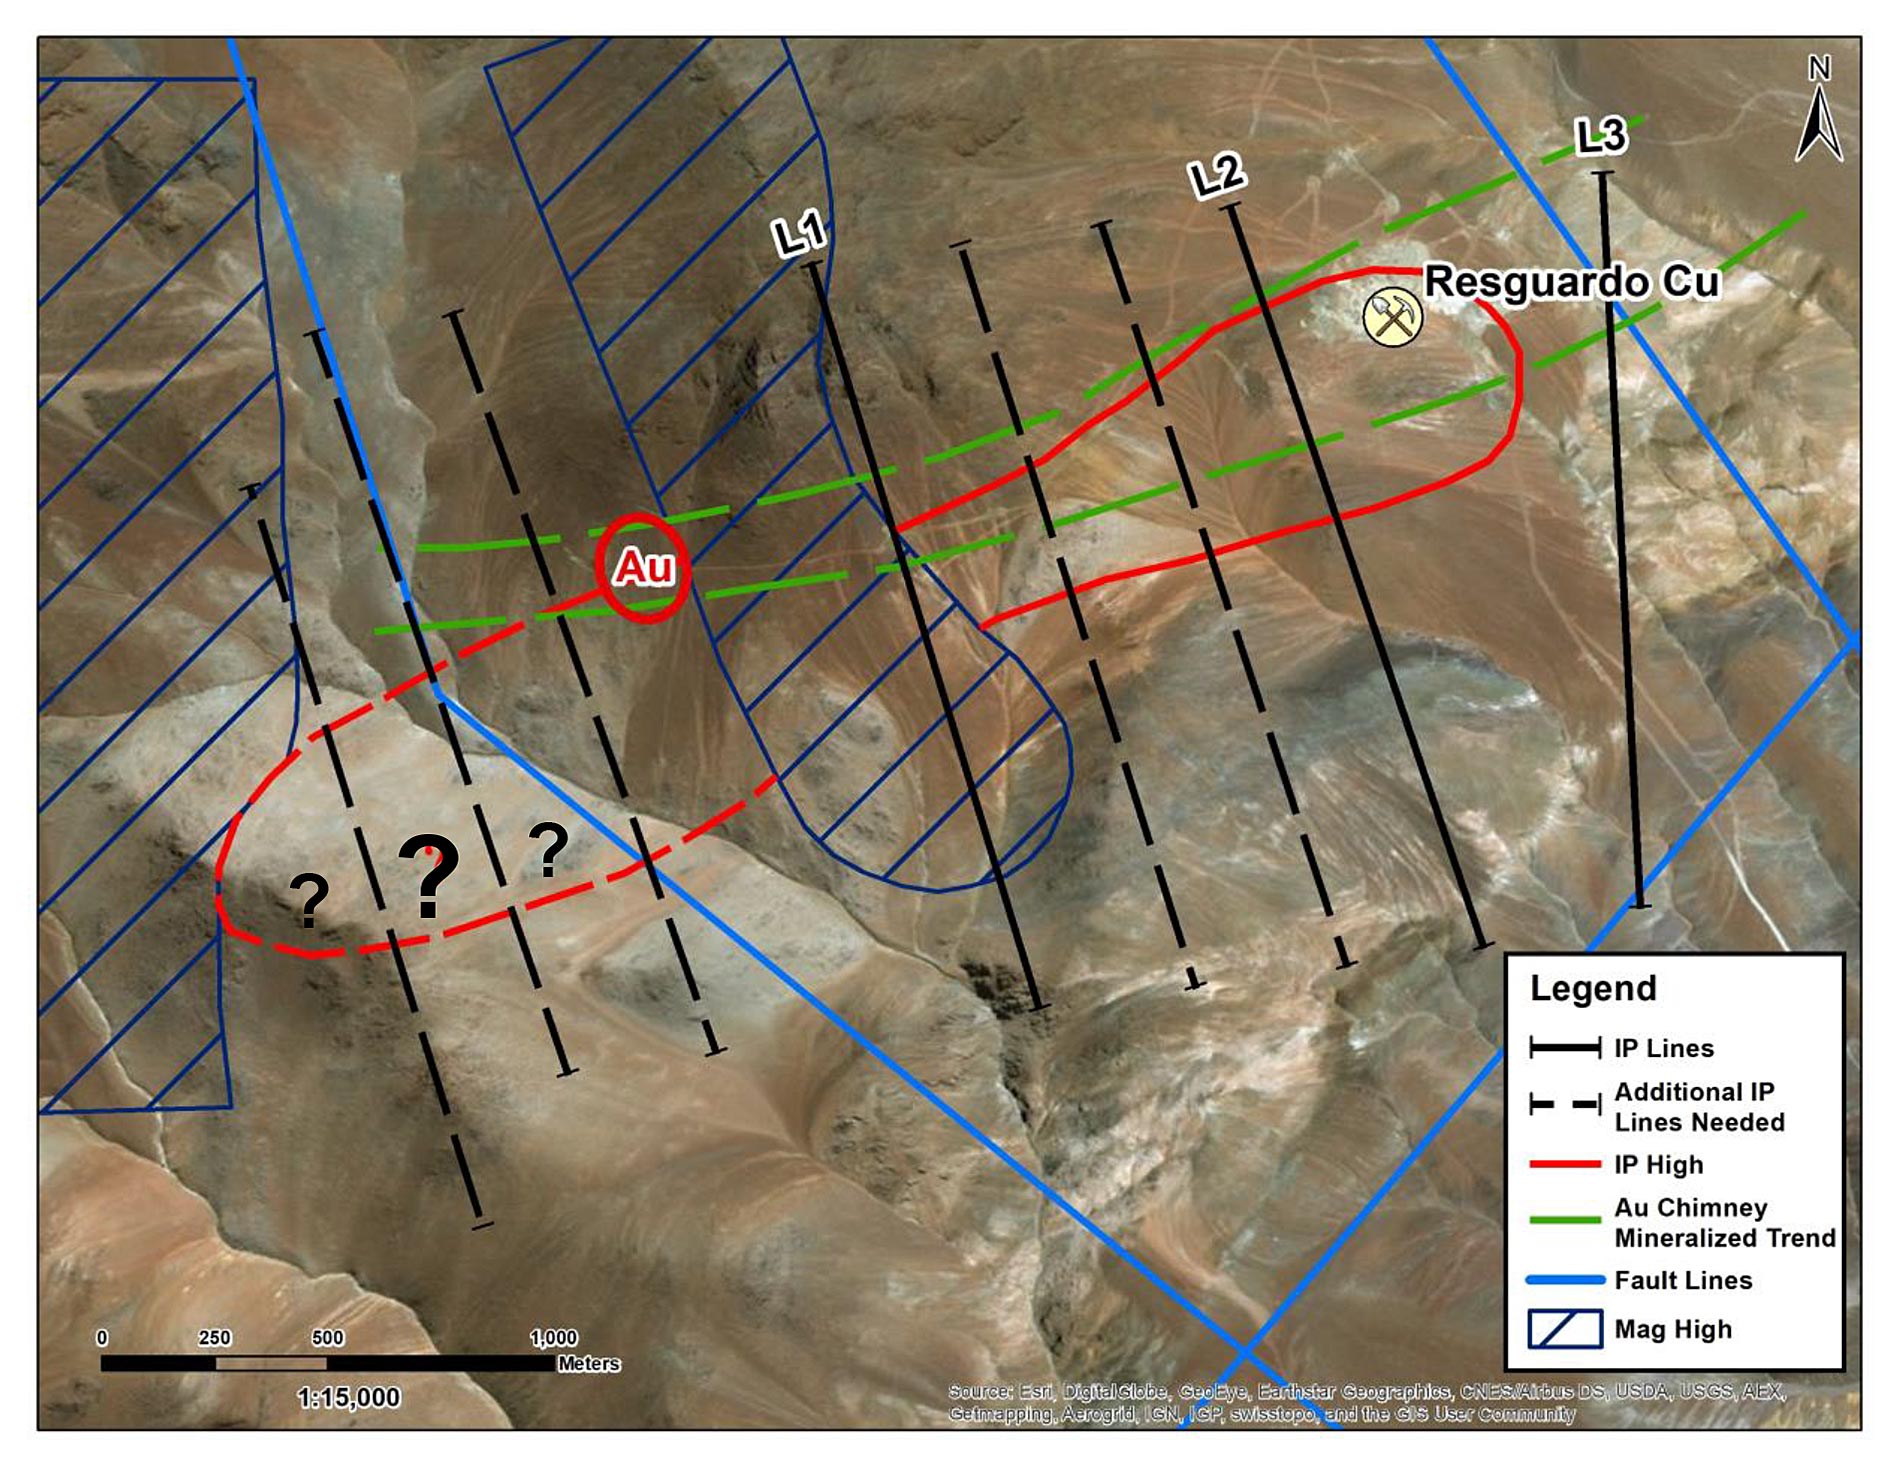 This graphic shows the current and proposed IP survey lines as well as a possible extension to the copper porphyry target and an area where gold grades (Au) are up to 50 g/t in narrow structures.